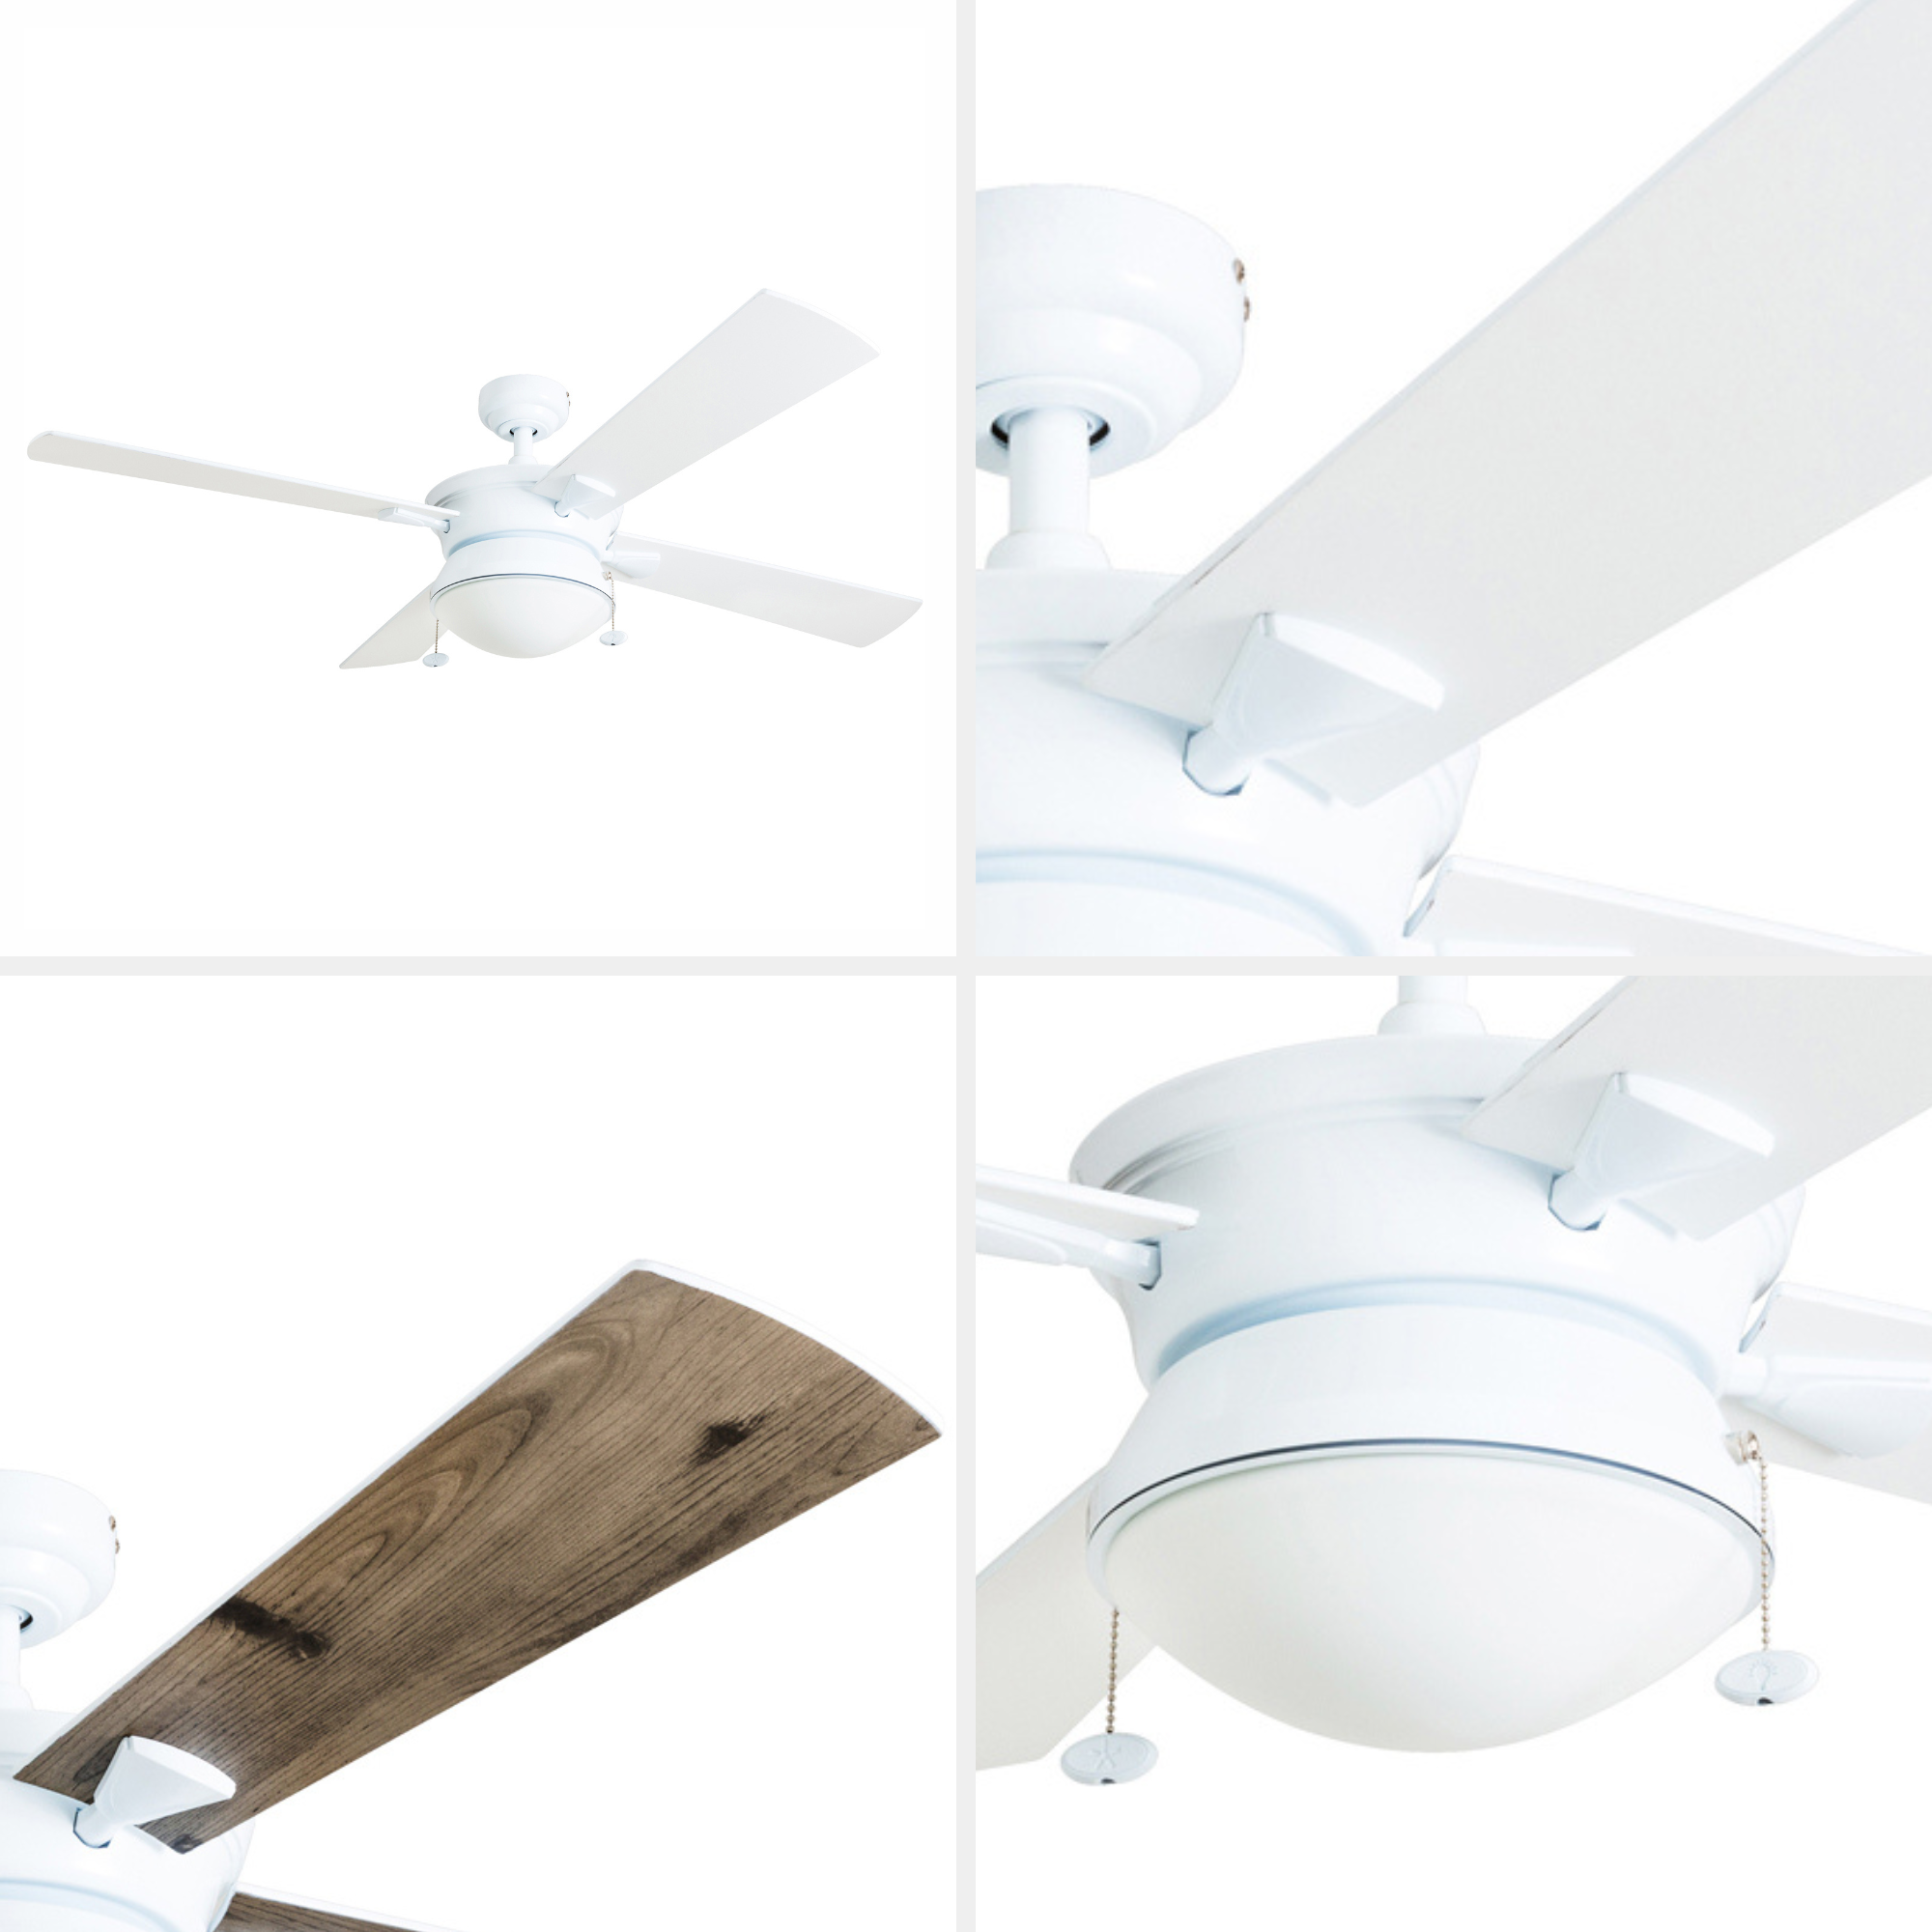 52 Inch Auletta, White, Pull Chain, Indoor/Outdoor Ceiling Fan by Prominence Home